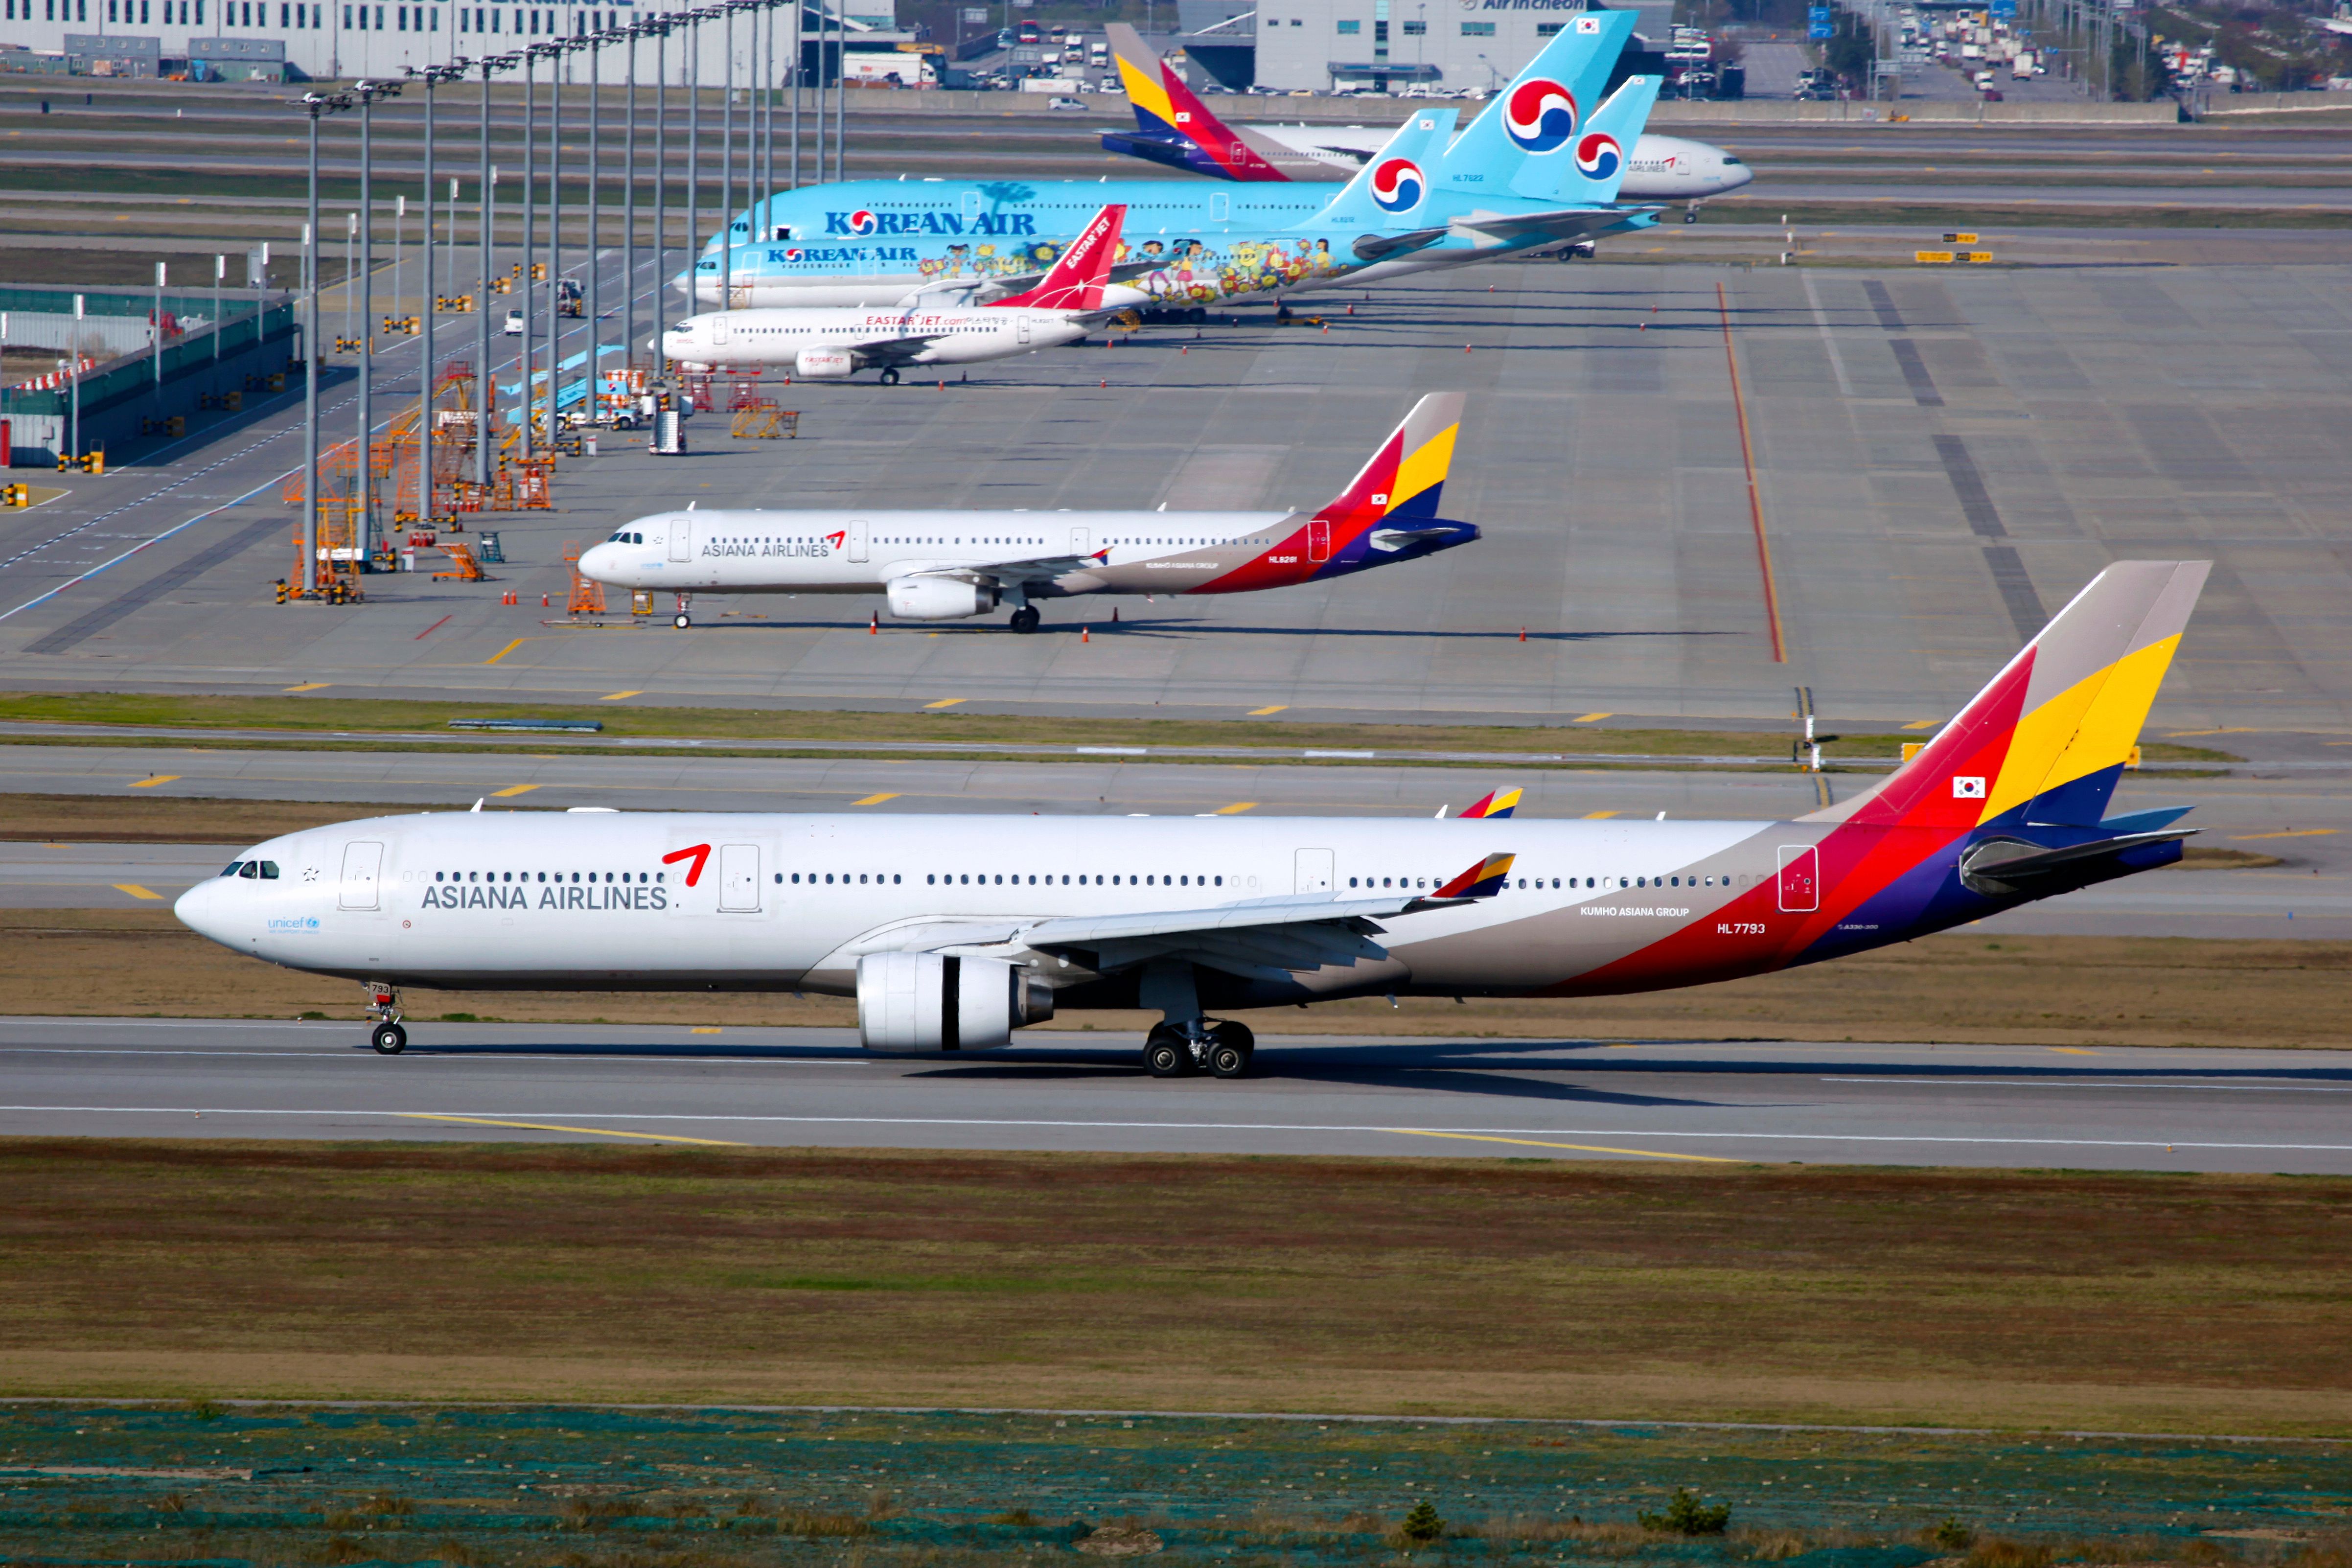 Asiana Airlines and Korean Airlines